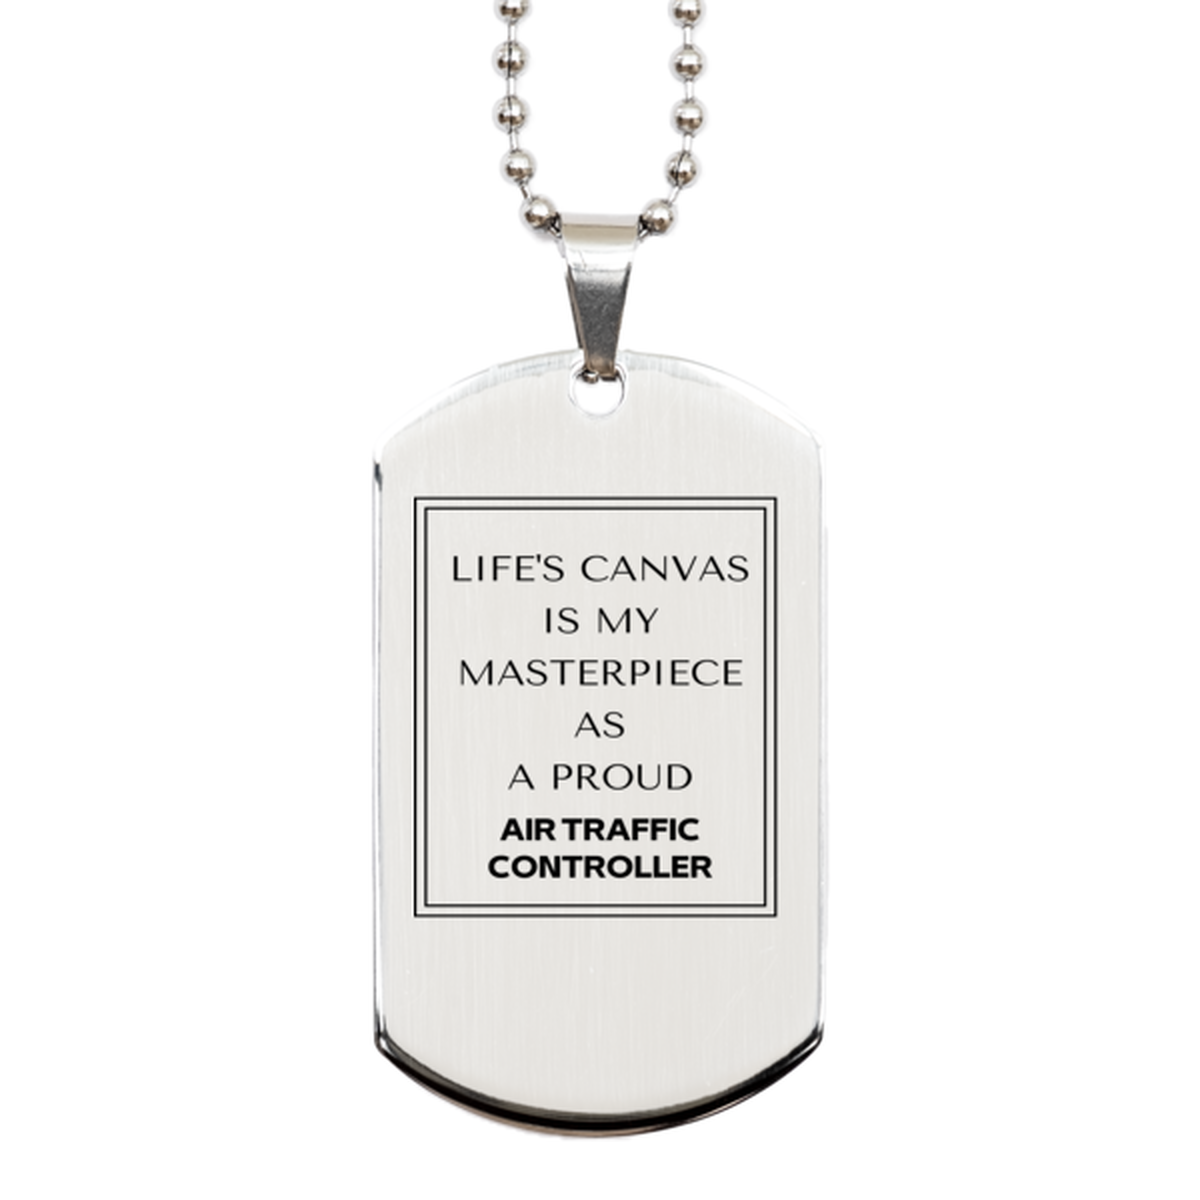 Proud Air Traffic Controller Gifts, Life's canvas is my masterpiece, Epic Birthday Christmas Unique Silver Dog Tag For Air Traffic Controller, Coworkers, Men, Women, Friends